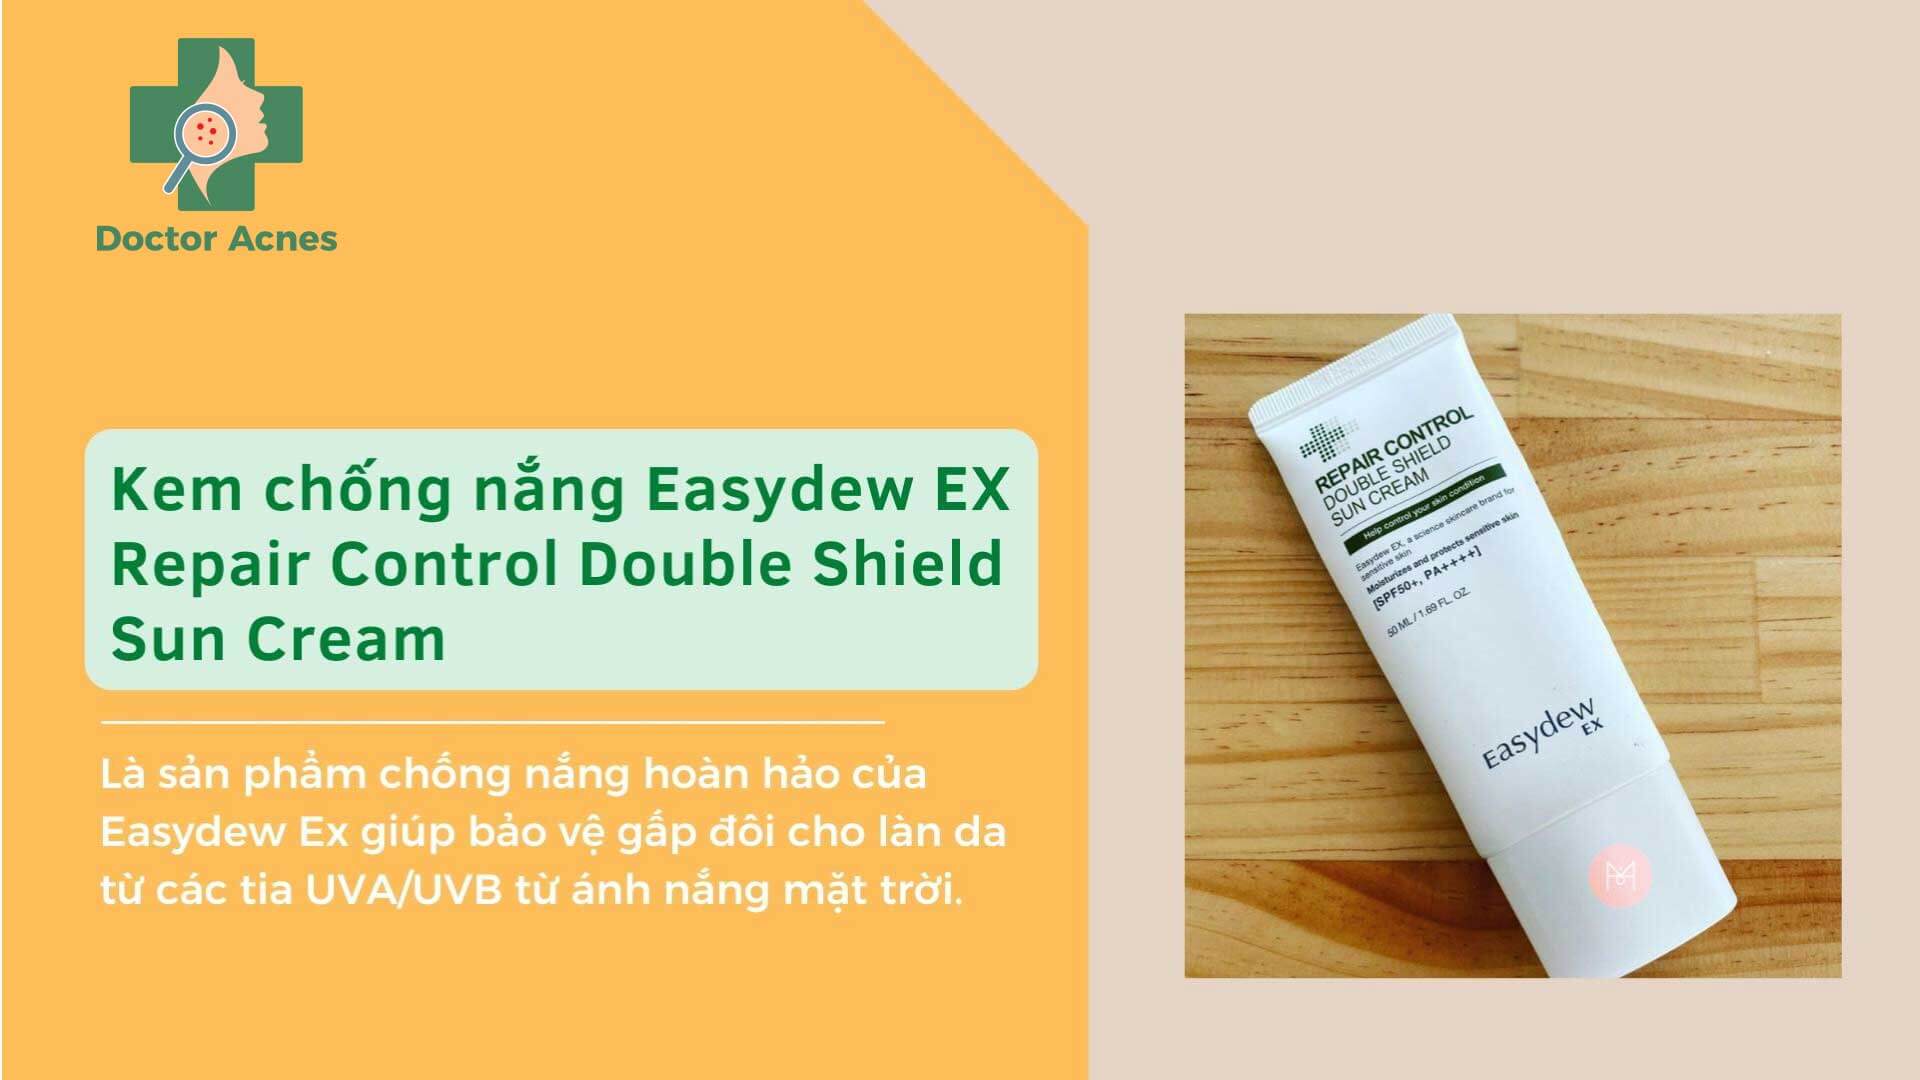 Kem chống nắng Easydew Ex Repair Control Double Shield Sun Cream SPF 50+ - Doctor Acnes